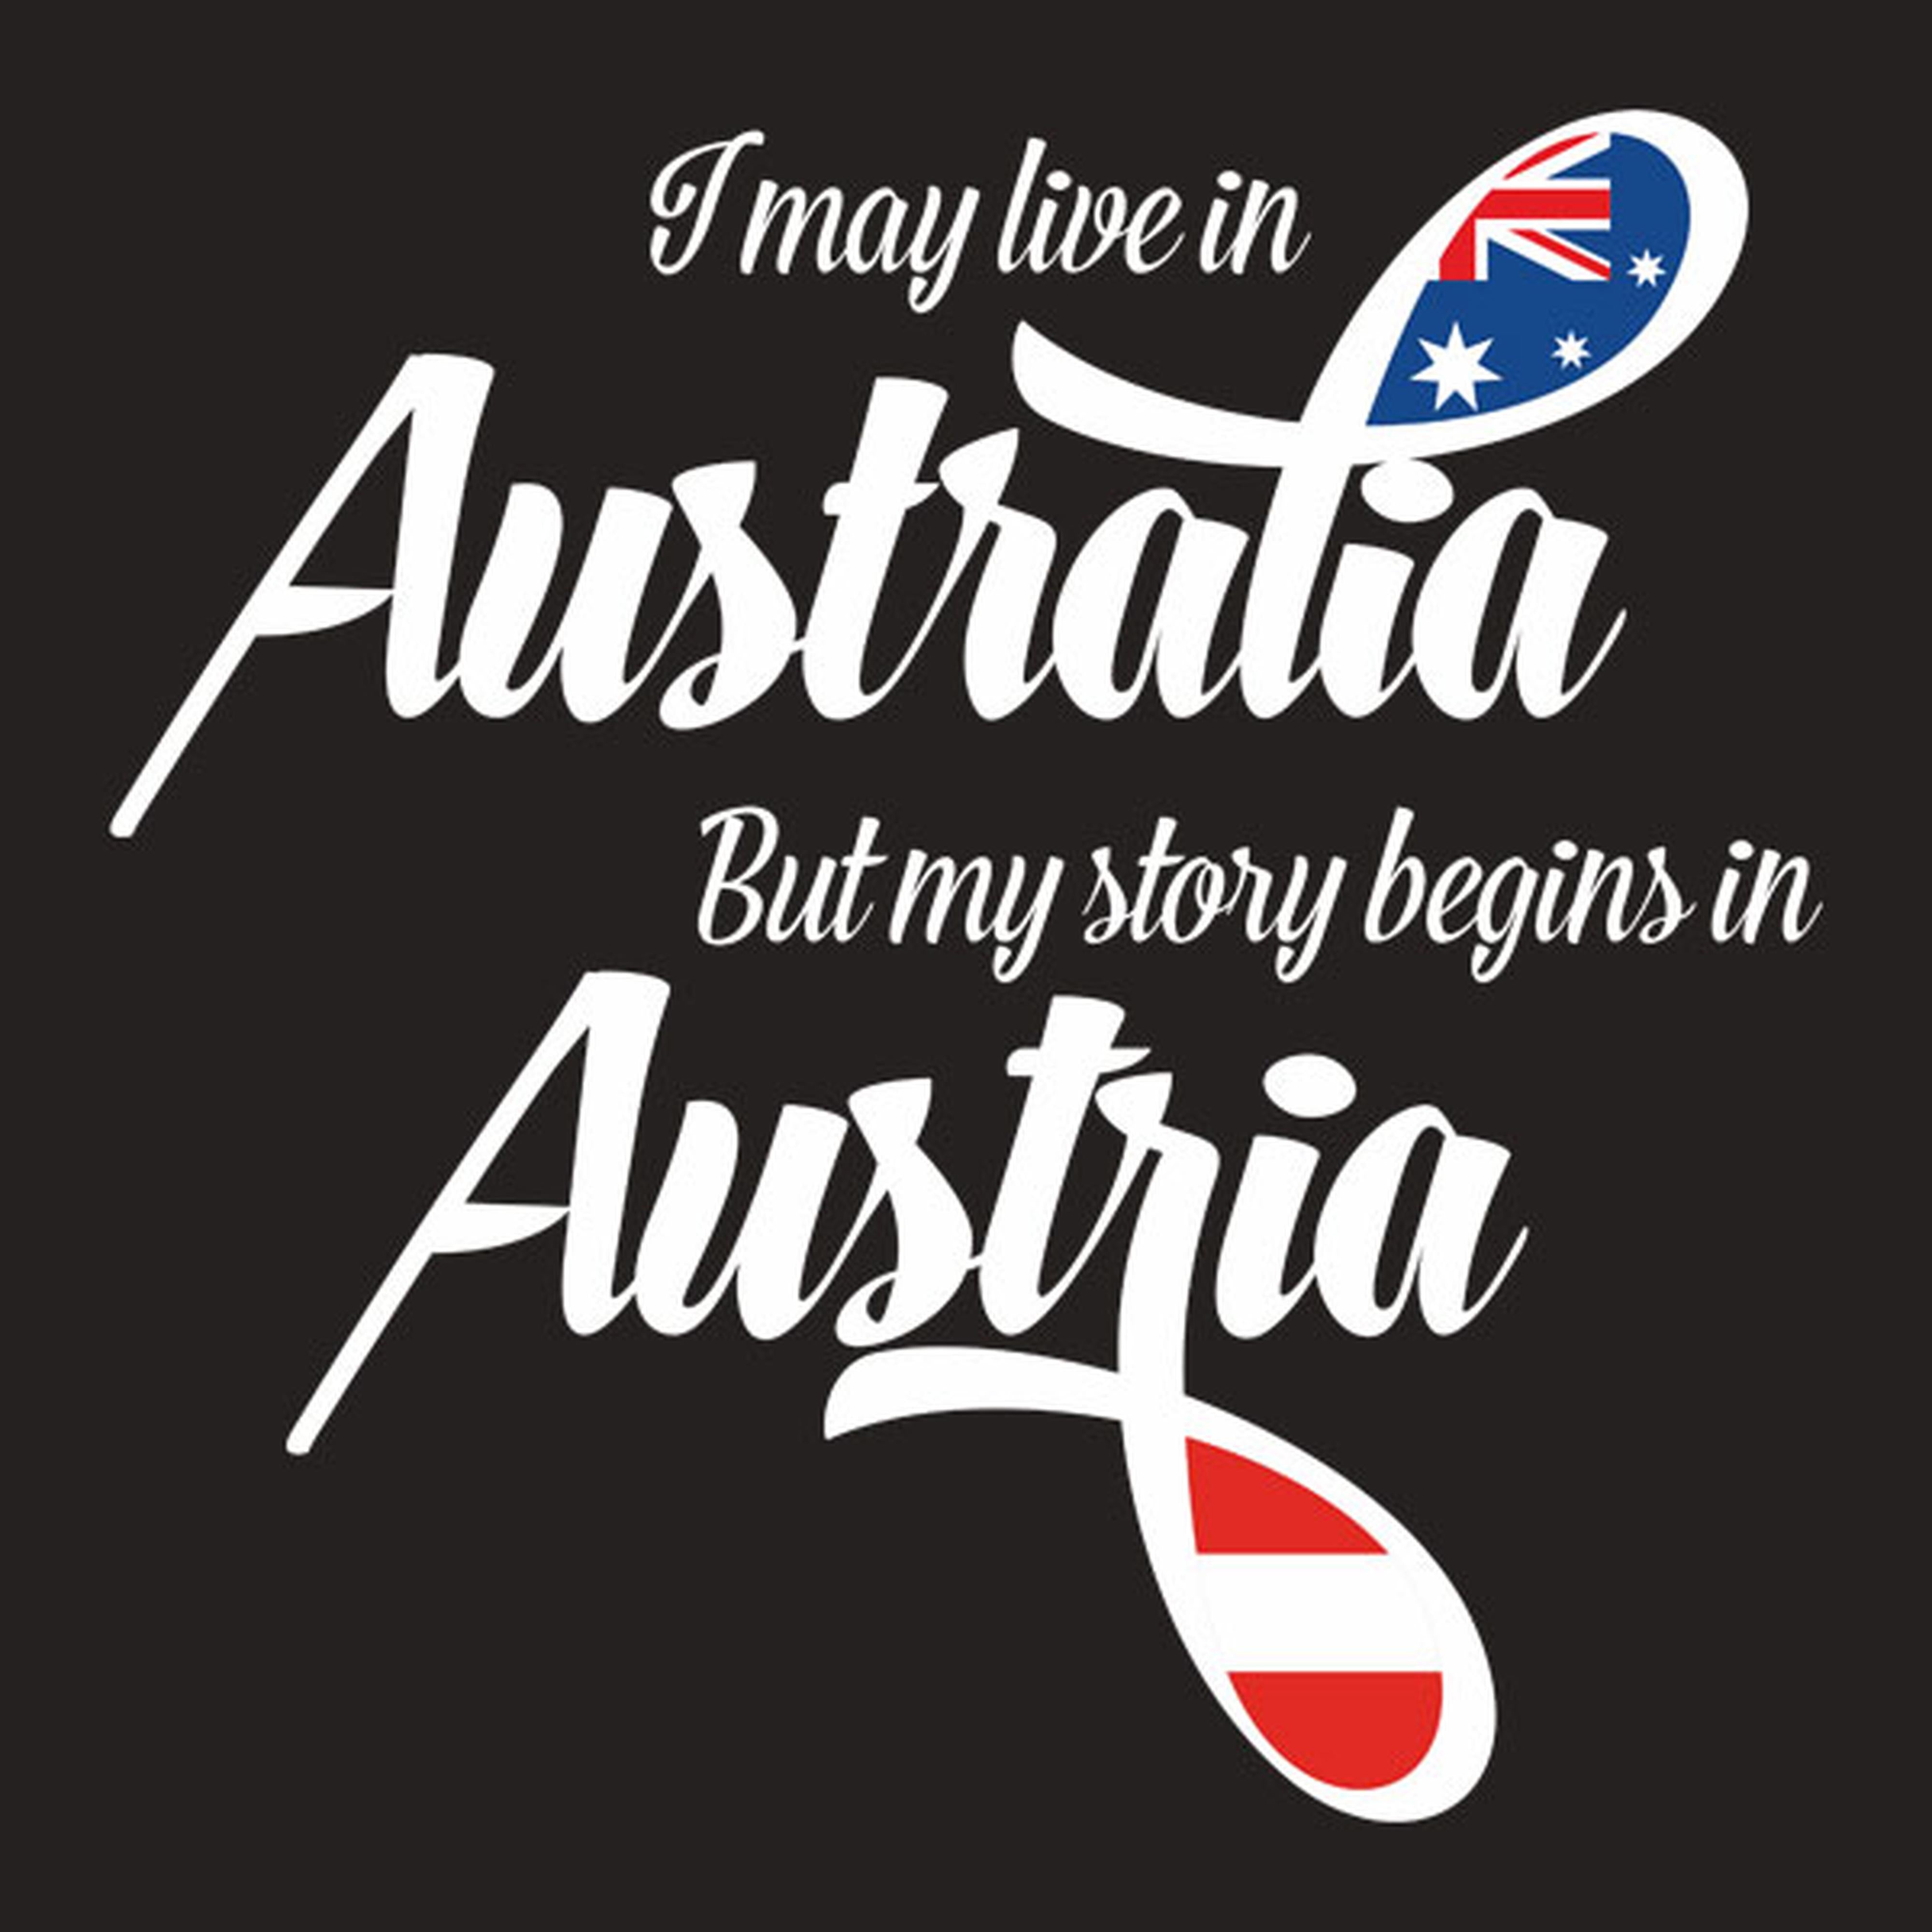 I may live in Australia but my story begins in Austria - T-shirt